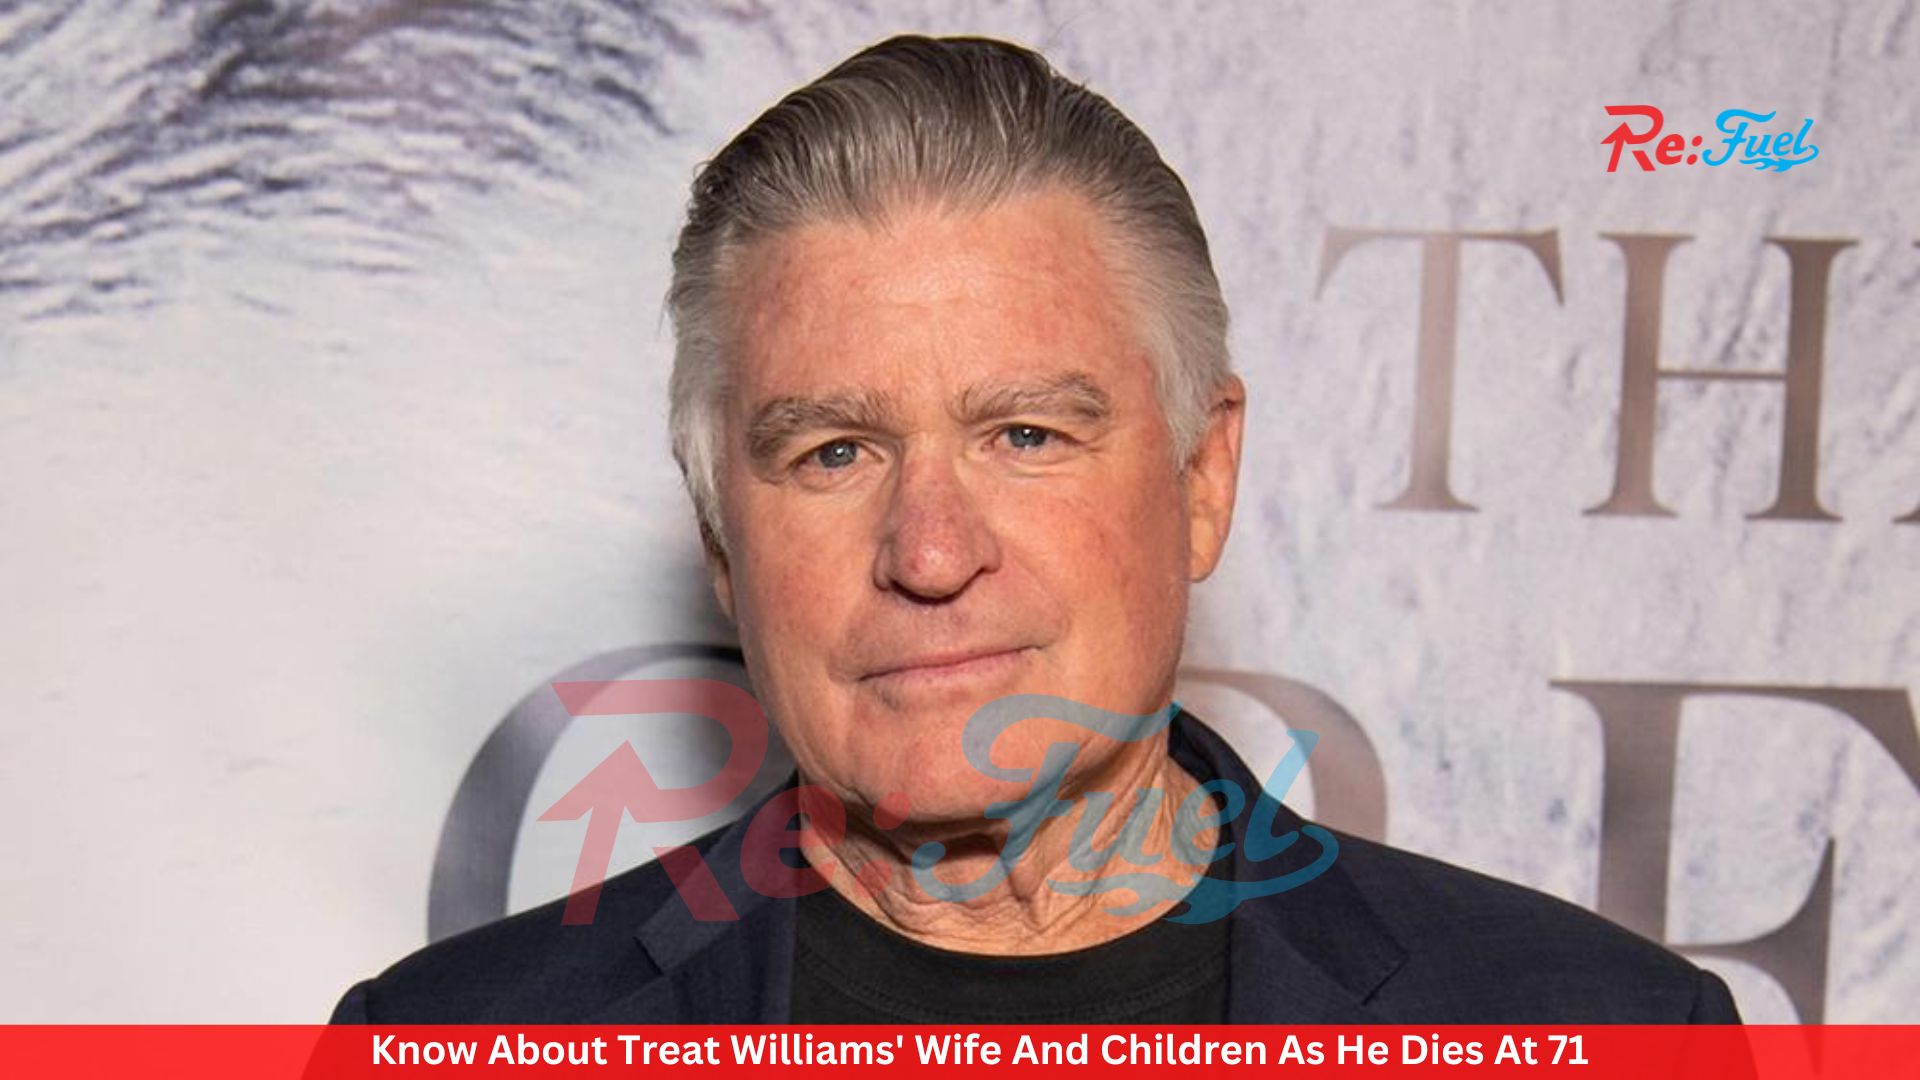 Know About Treat Williams' Wife And Children As He Dies At 71